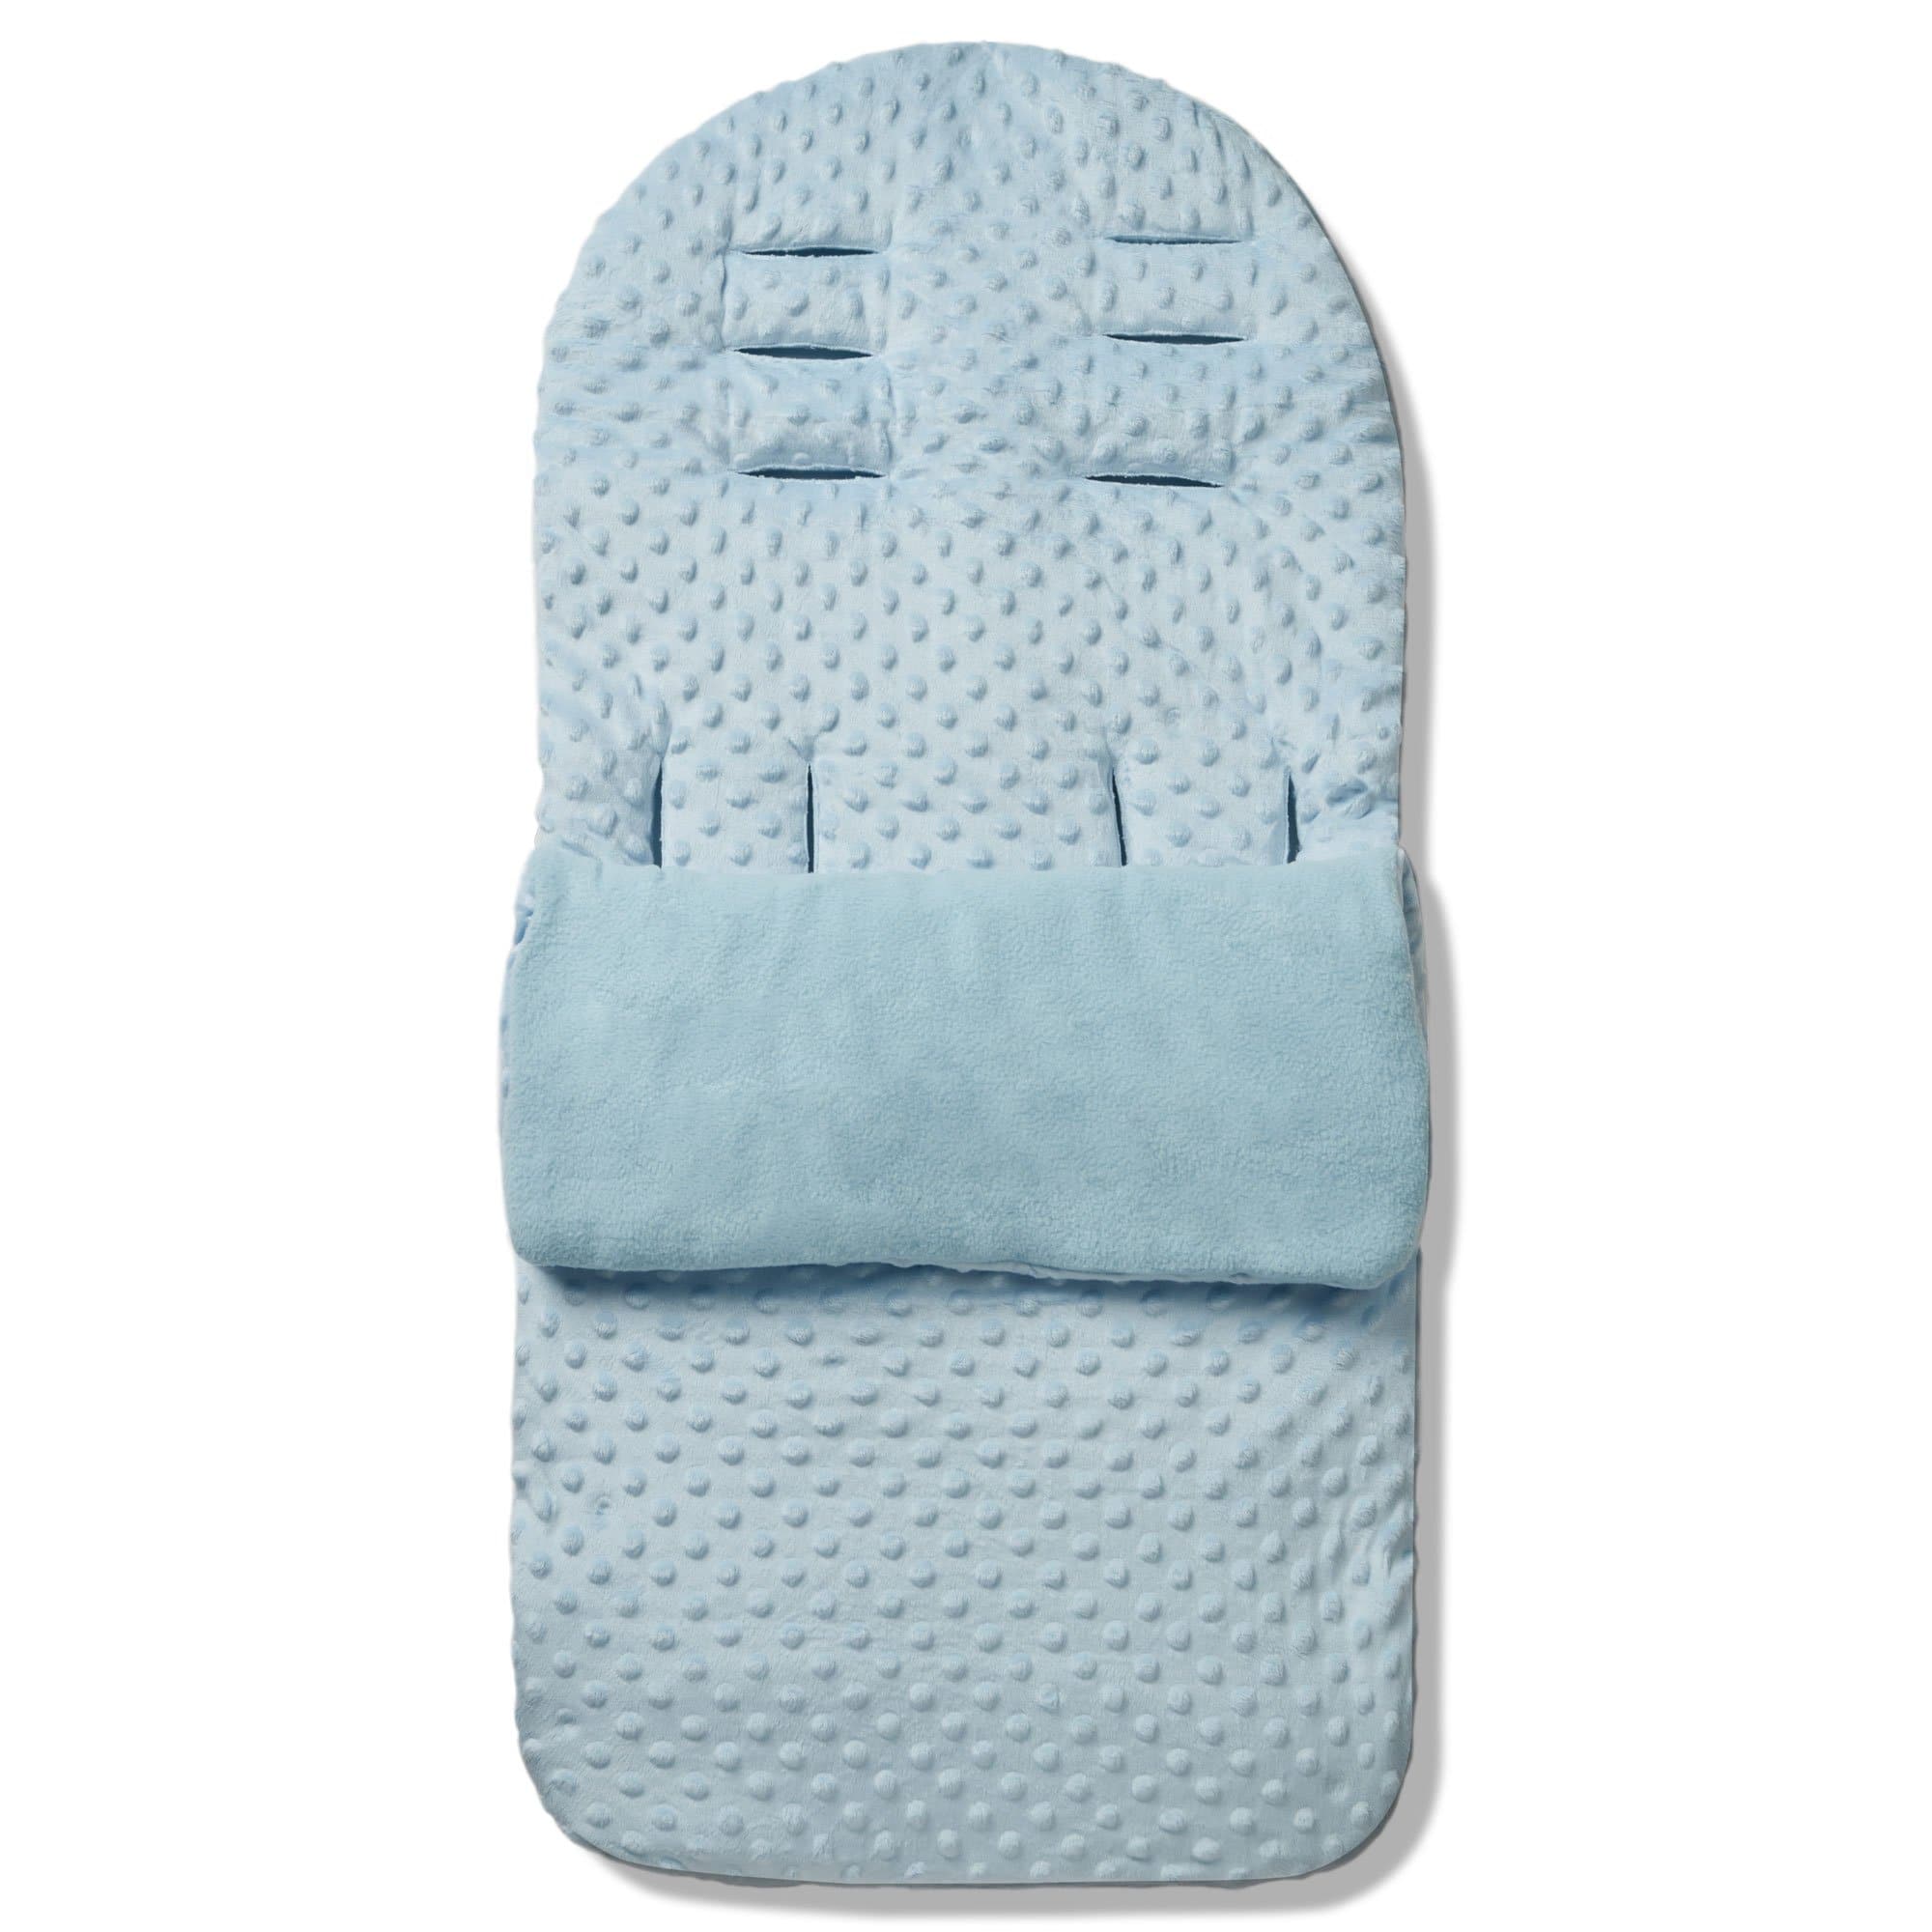 Dimple Footmuff / Cosy Toes Compatible with Gesslein - Blue / Fits All Models | For Your Little One